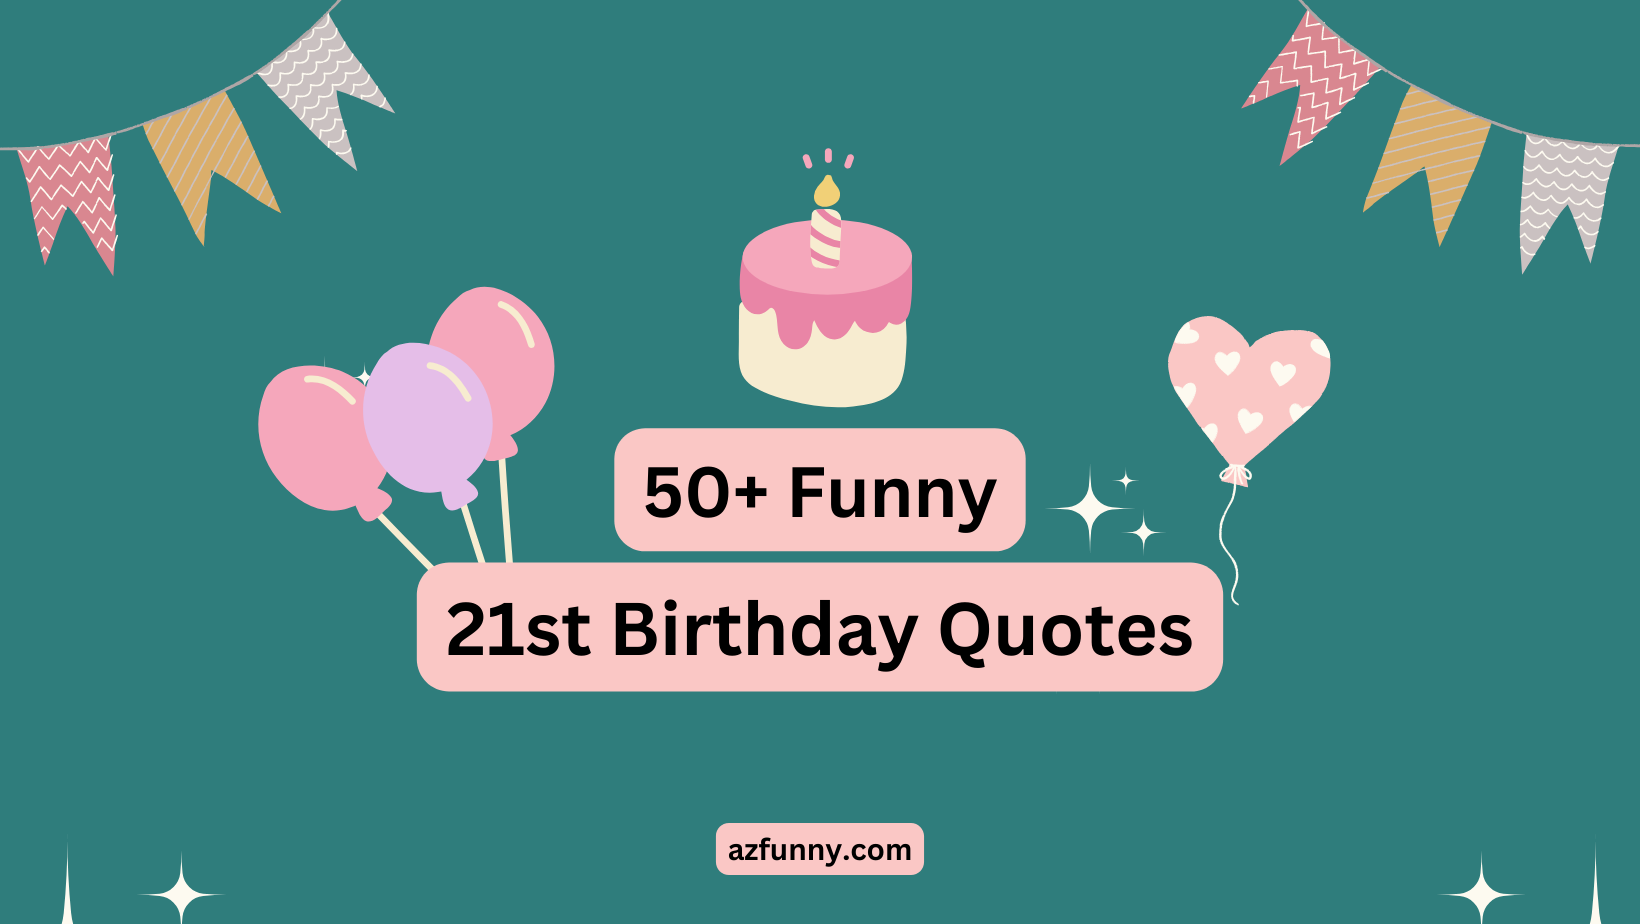 50+ Funny 21st Birthday Quotes That Makes You LOL